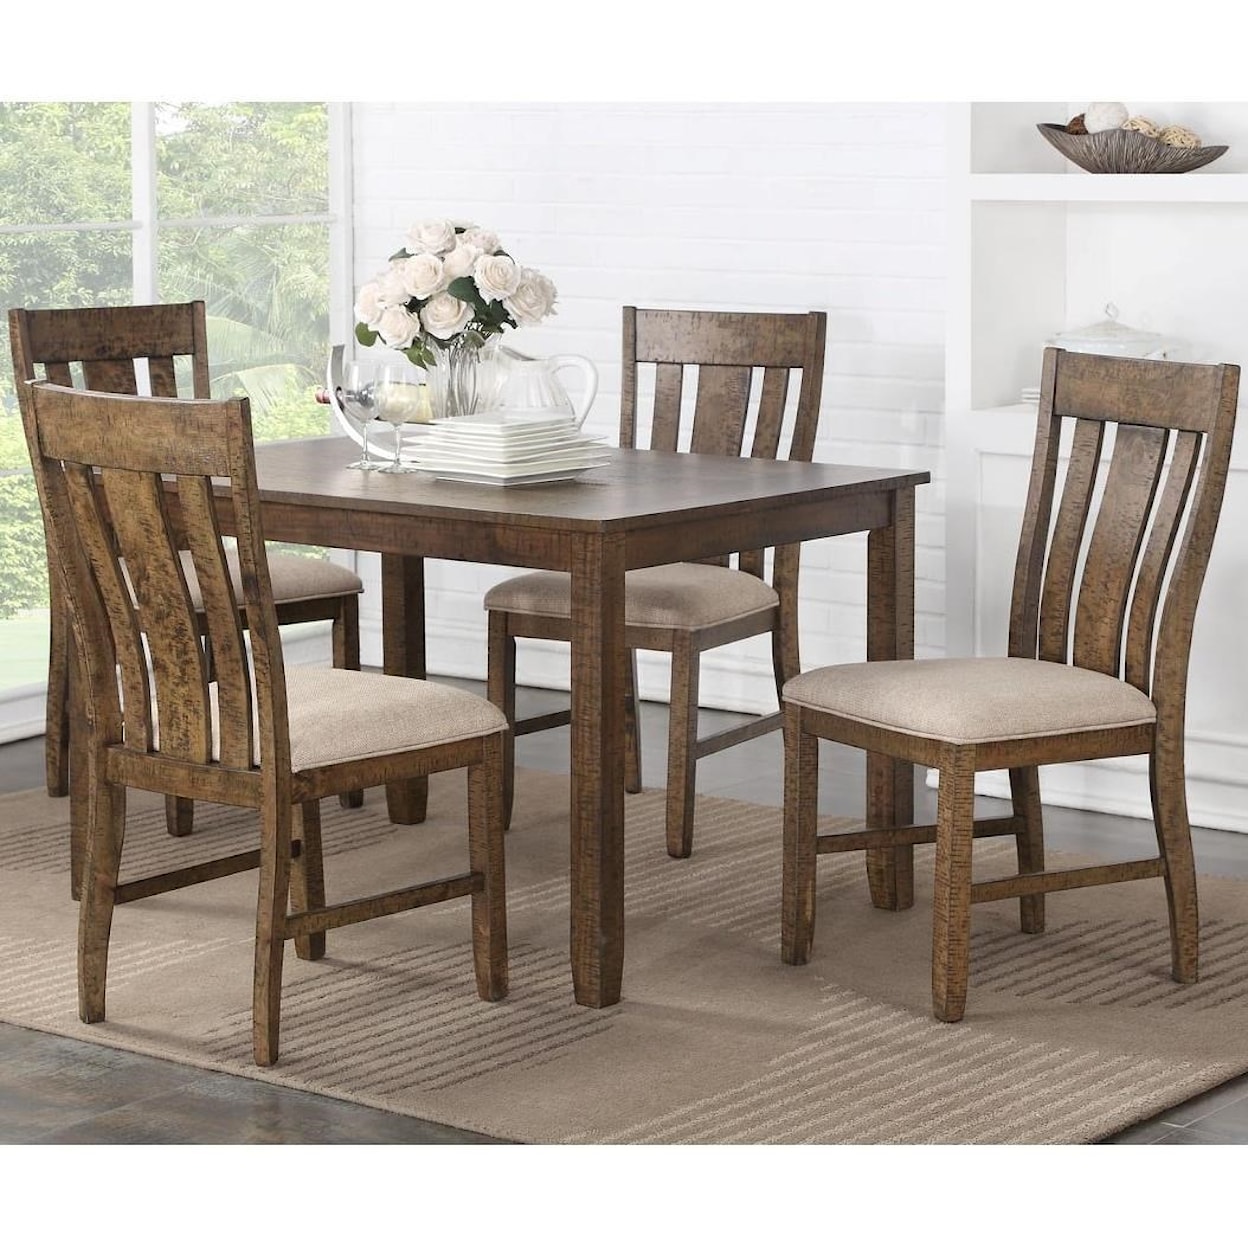 Avalon Furniture Mill Road 5 Piece Table and Chair Set 